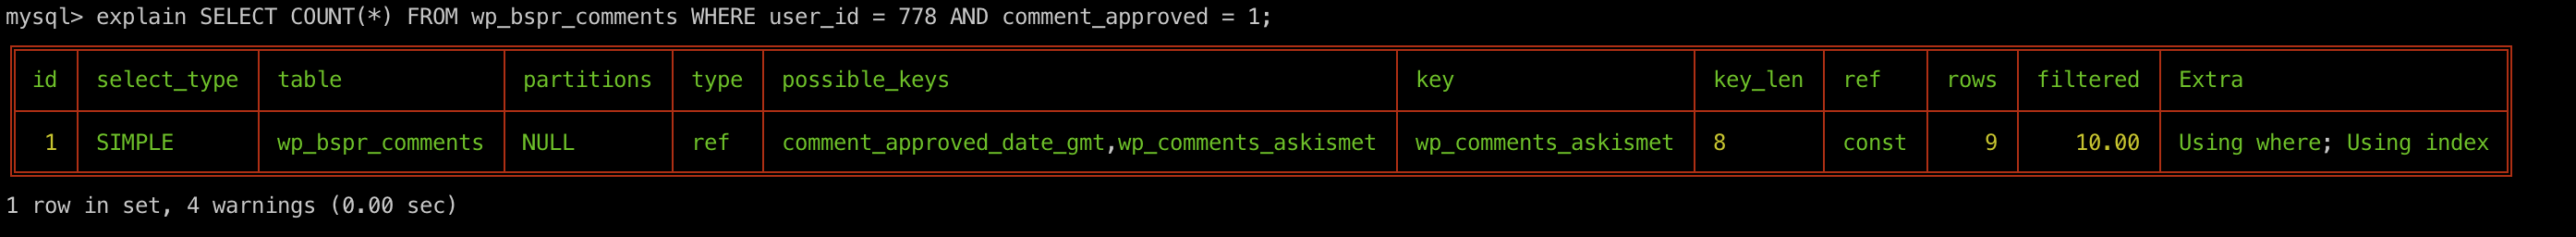 MySQL Explain on wp_comments with Aksimet after index